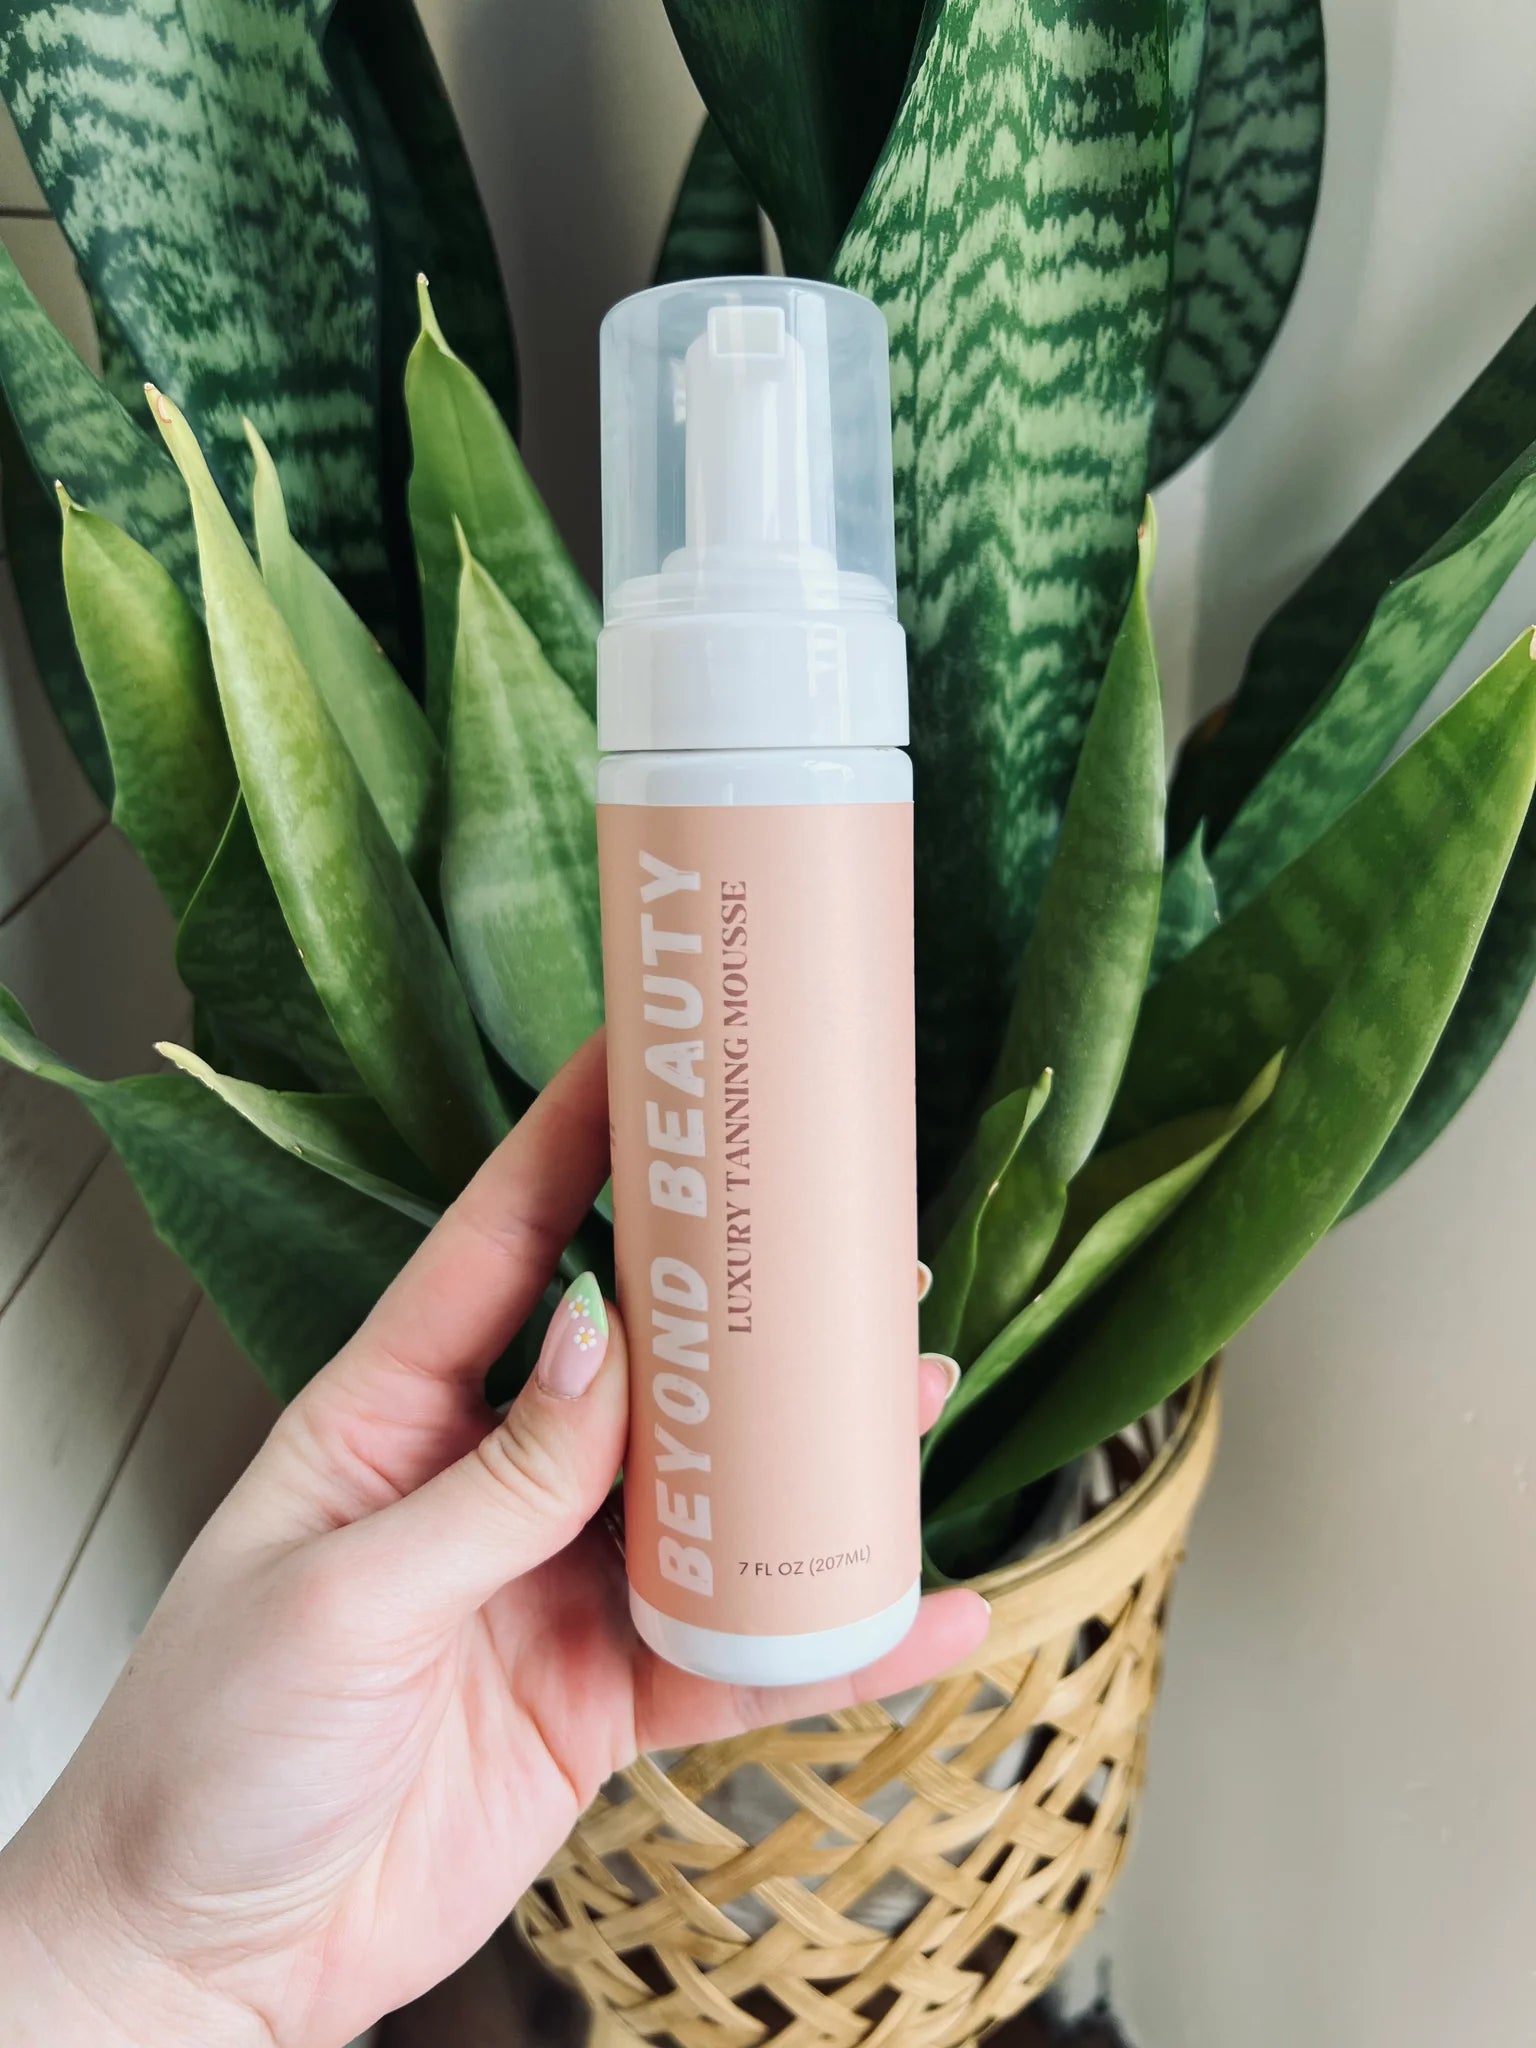 Beyond Beauty Luxury Tanning Mousse